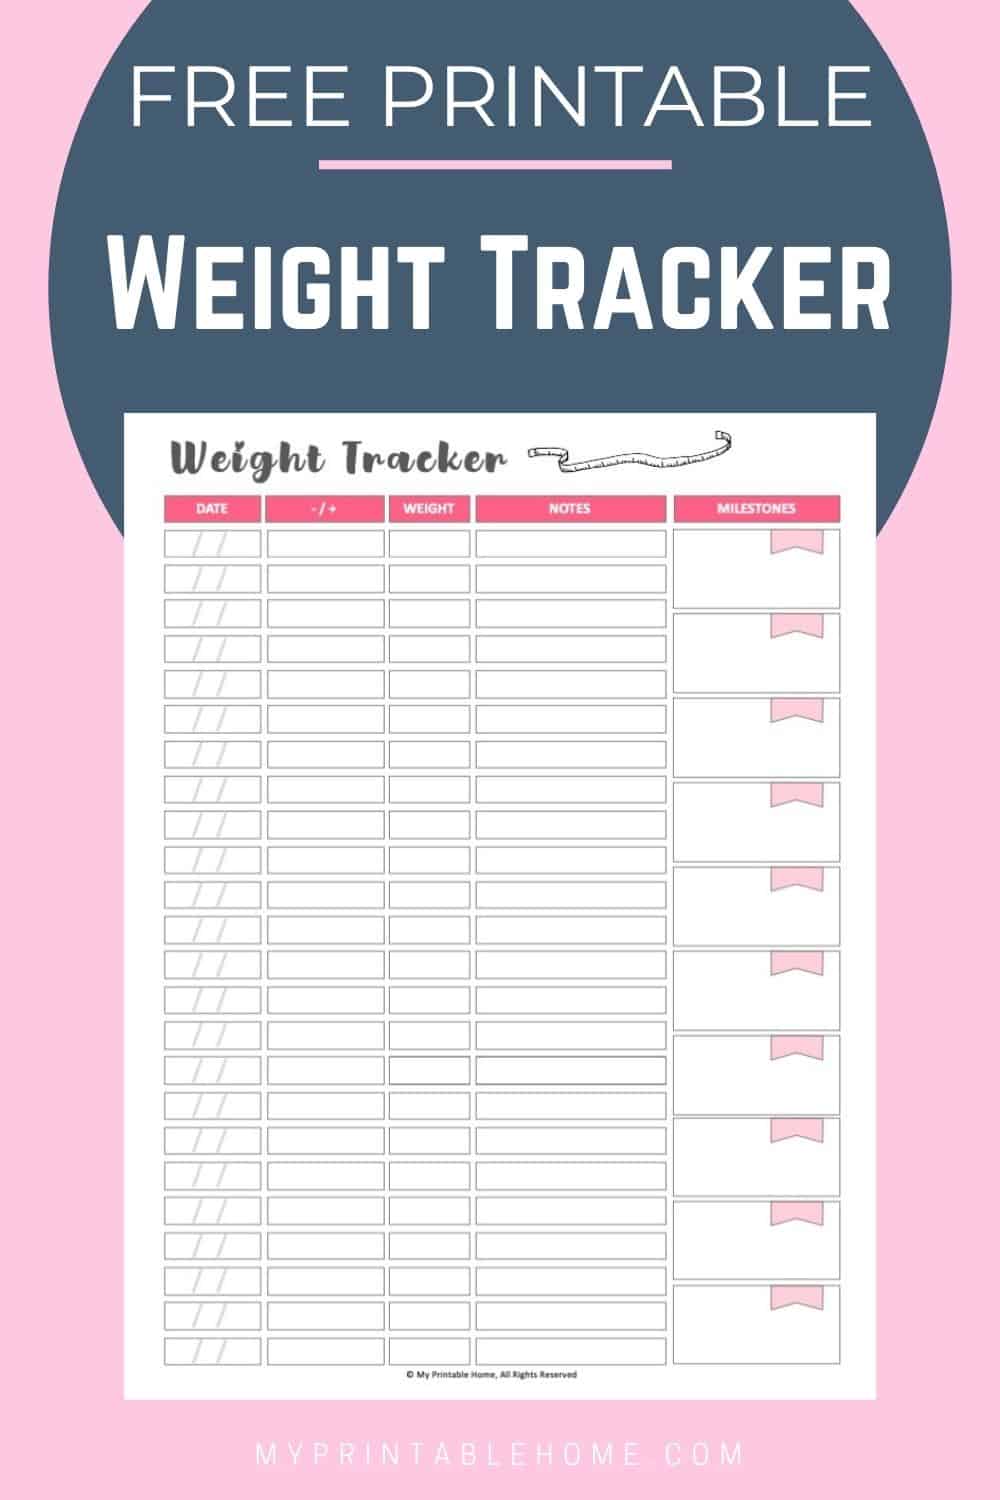 Weight Tracker My Printable Home